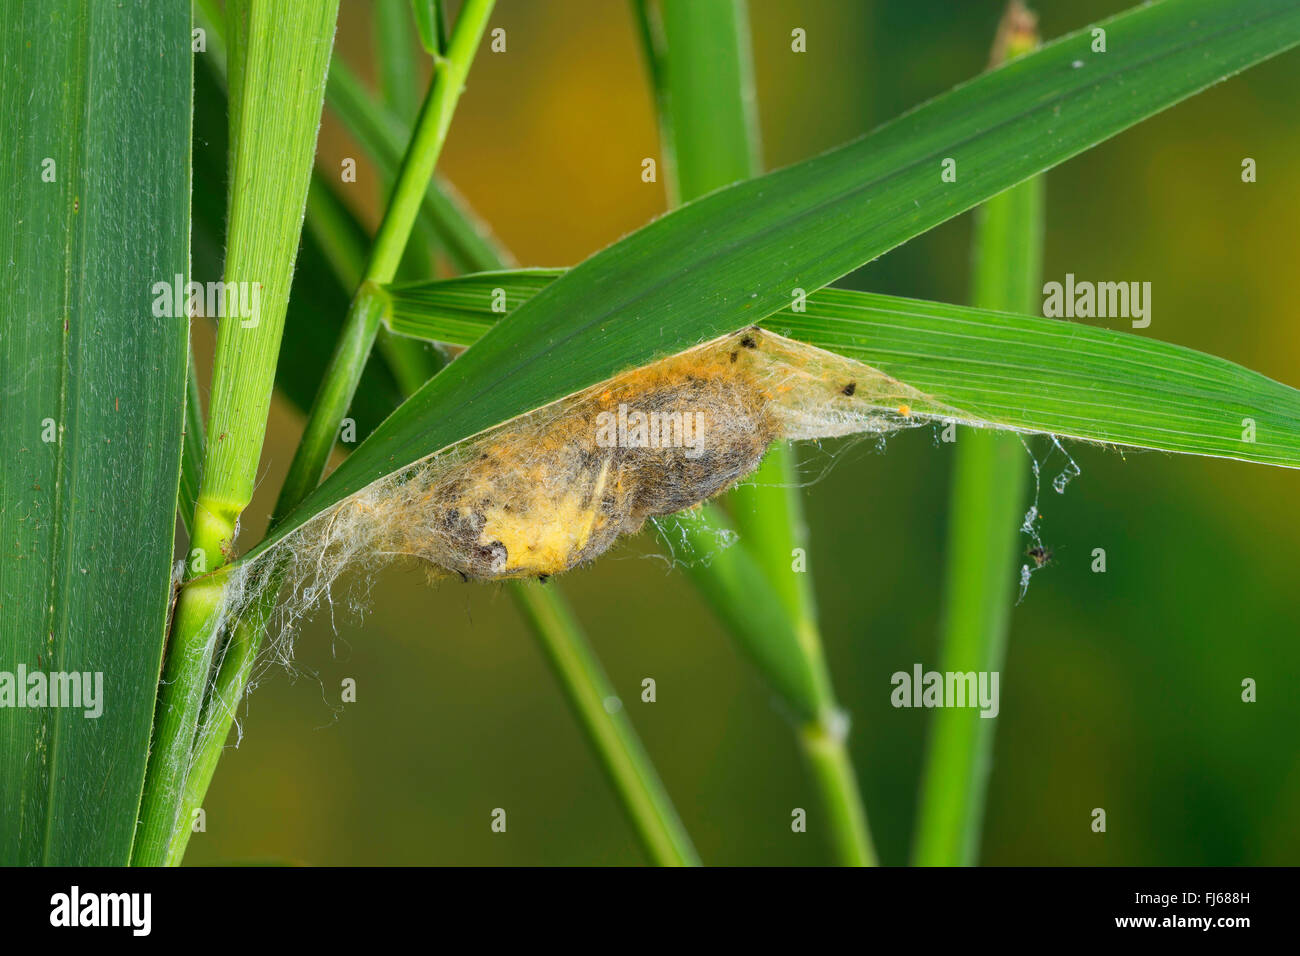 The Drinker (Philudoria potatoria, Euthrix potatoria), pupa in a cocoon at a blade of grass, Germany Stock Photo